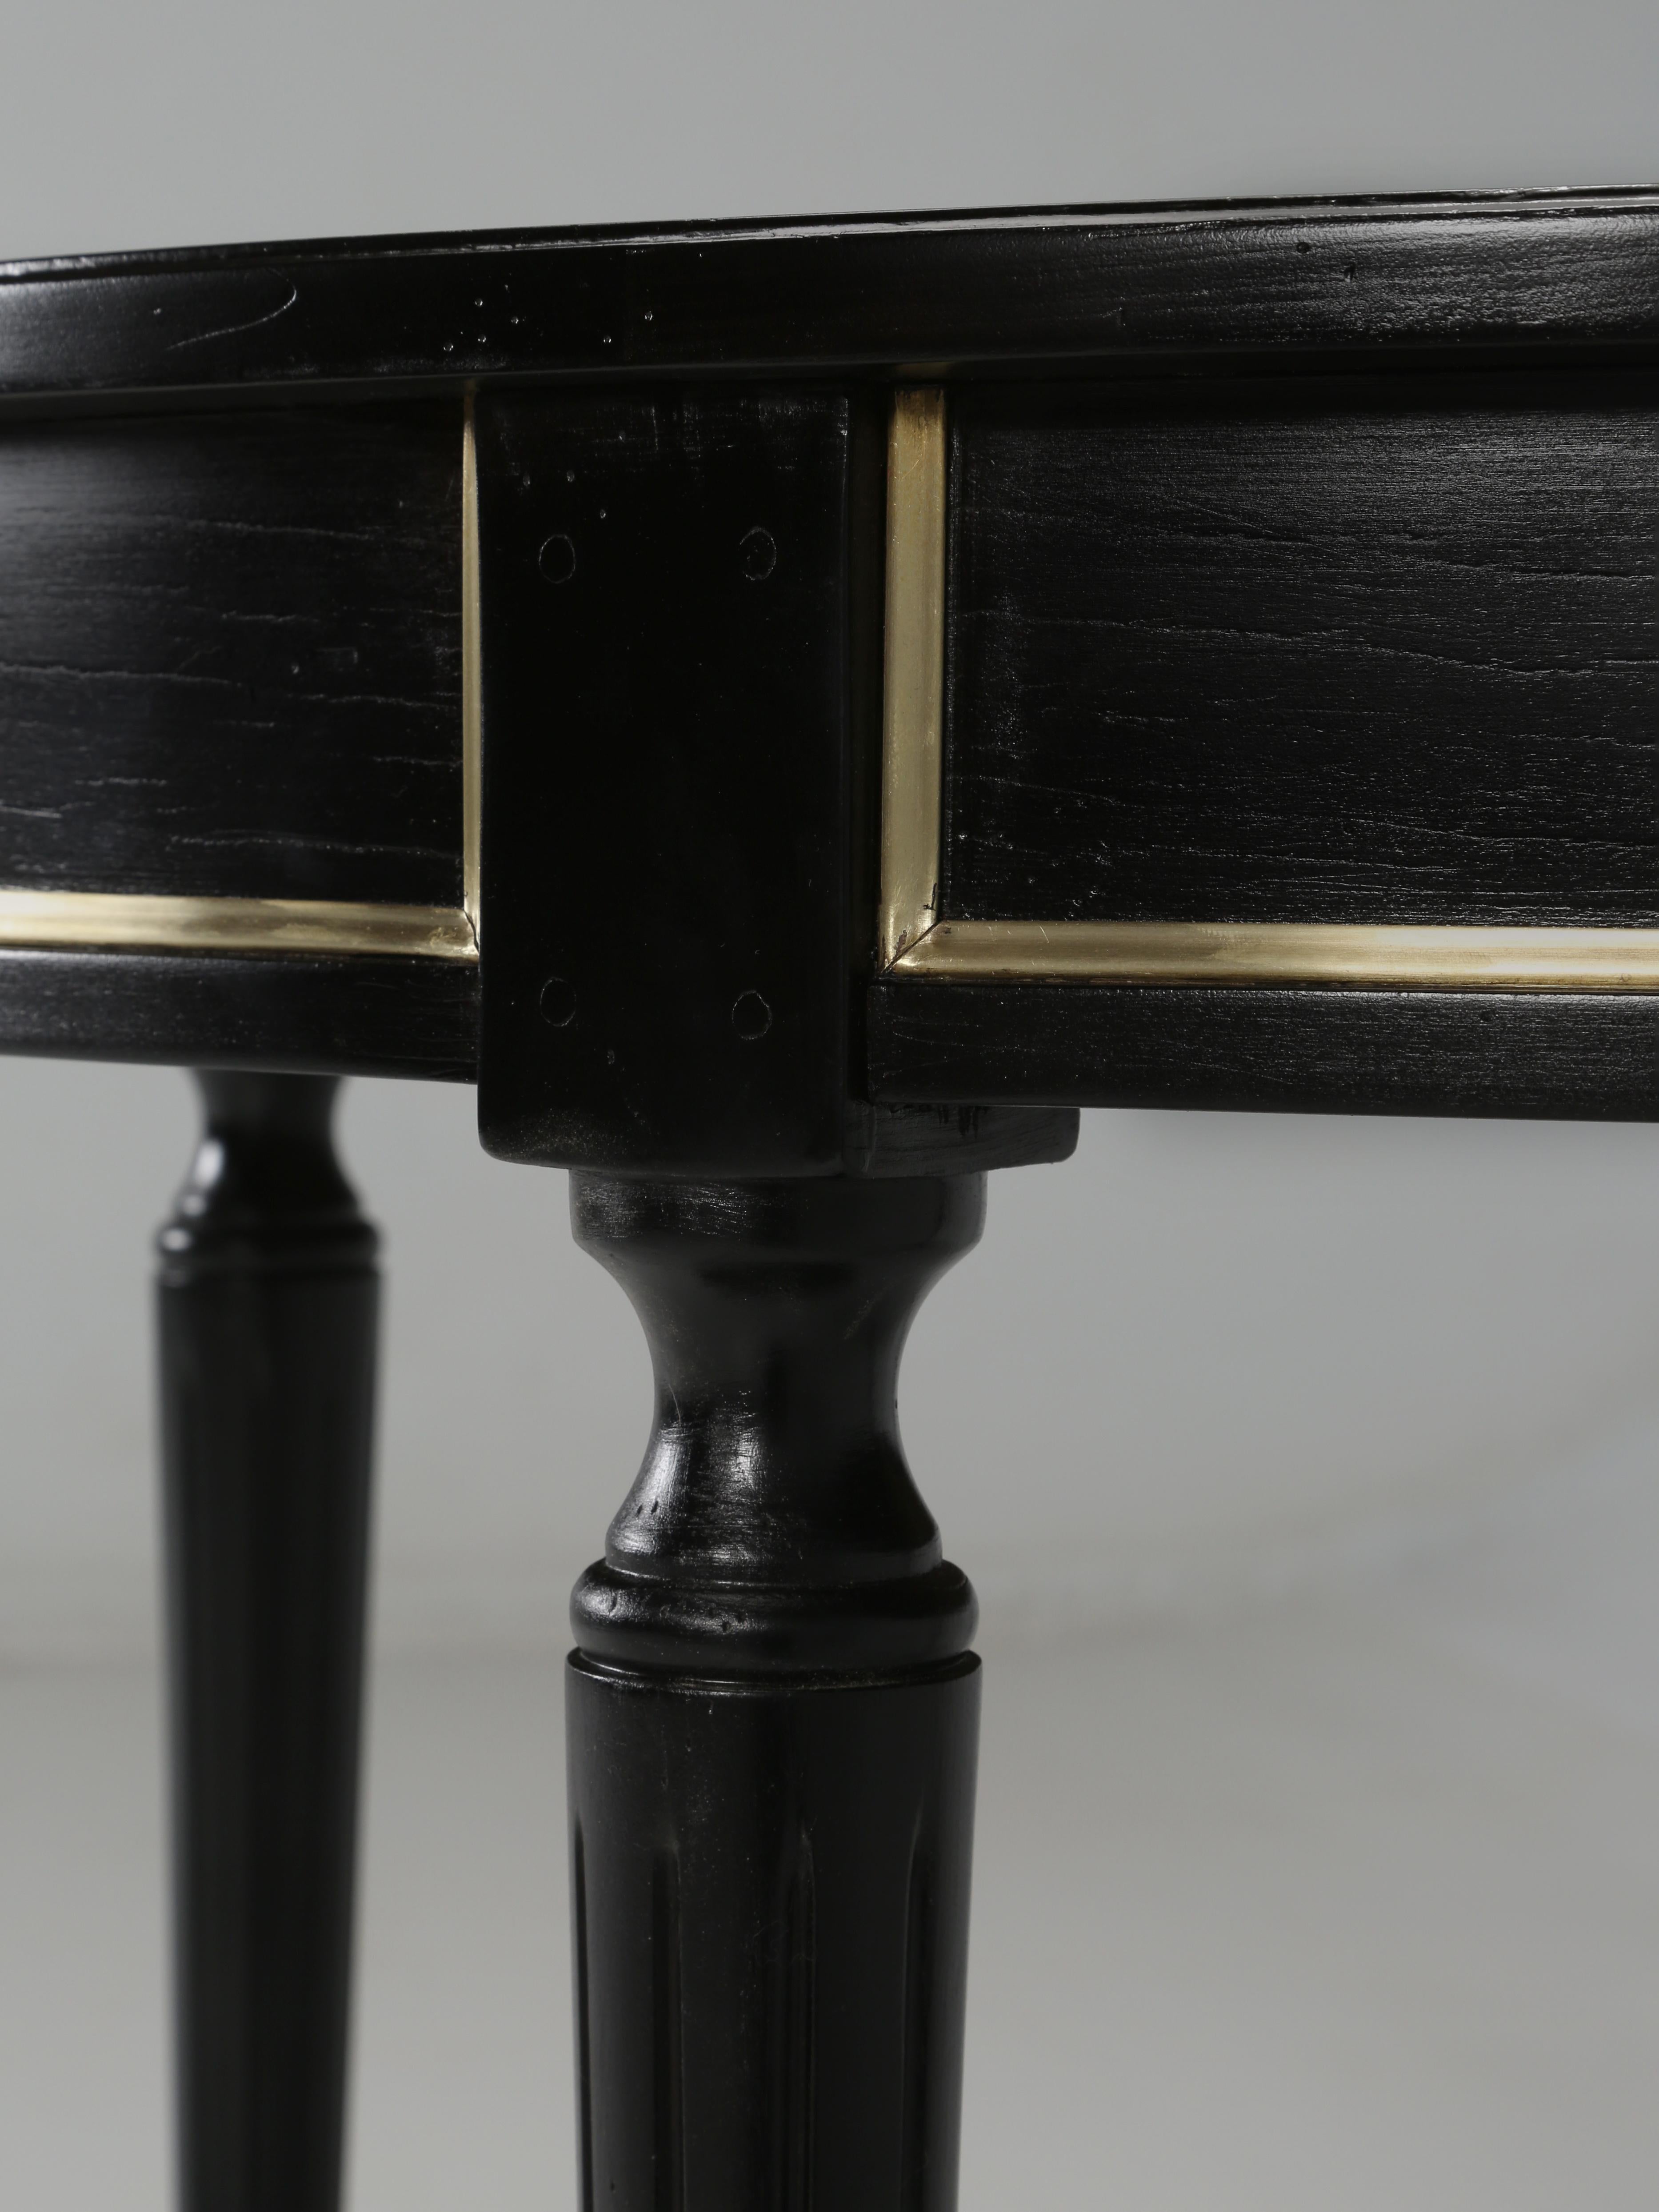 Vintage French Louis XVI Style Round Dining Table with Recent Ebonized Finish 1